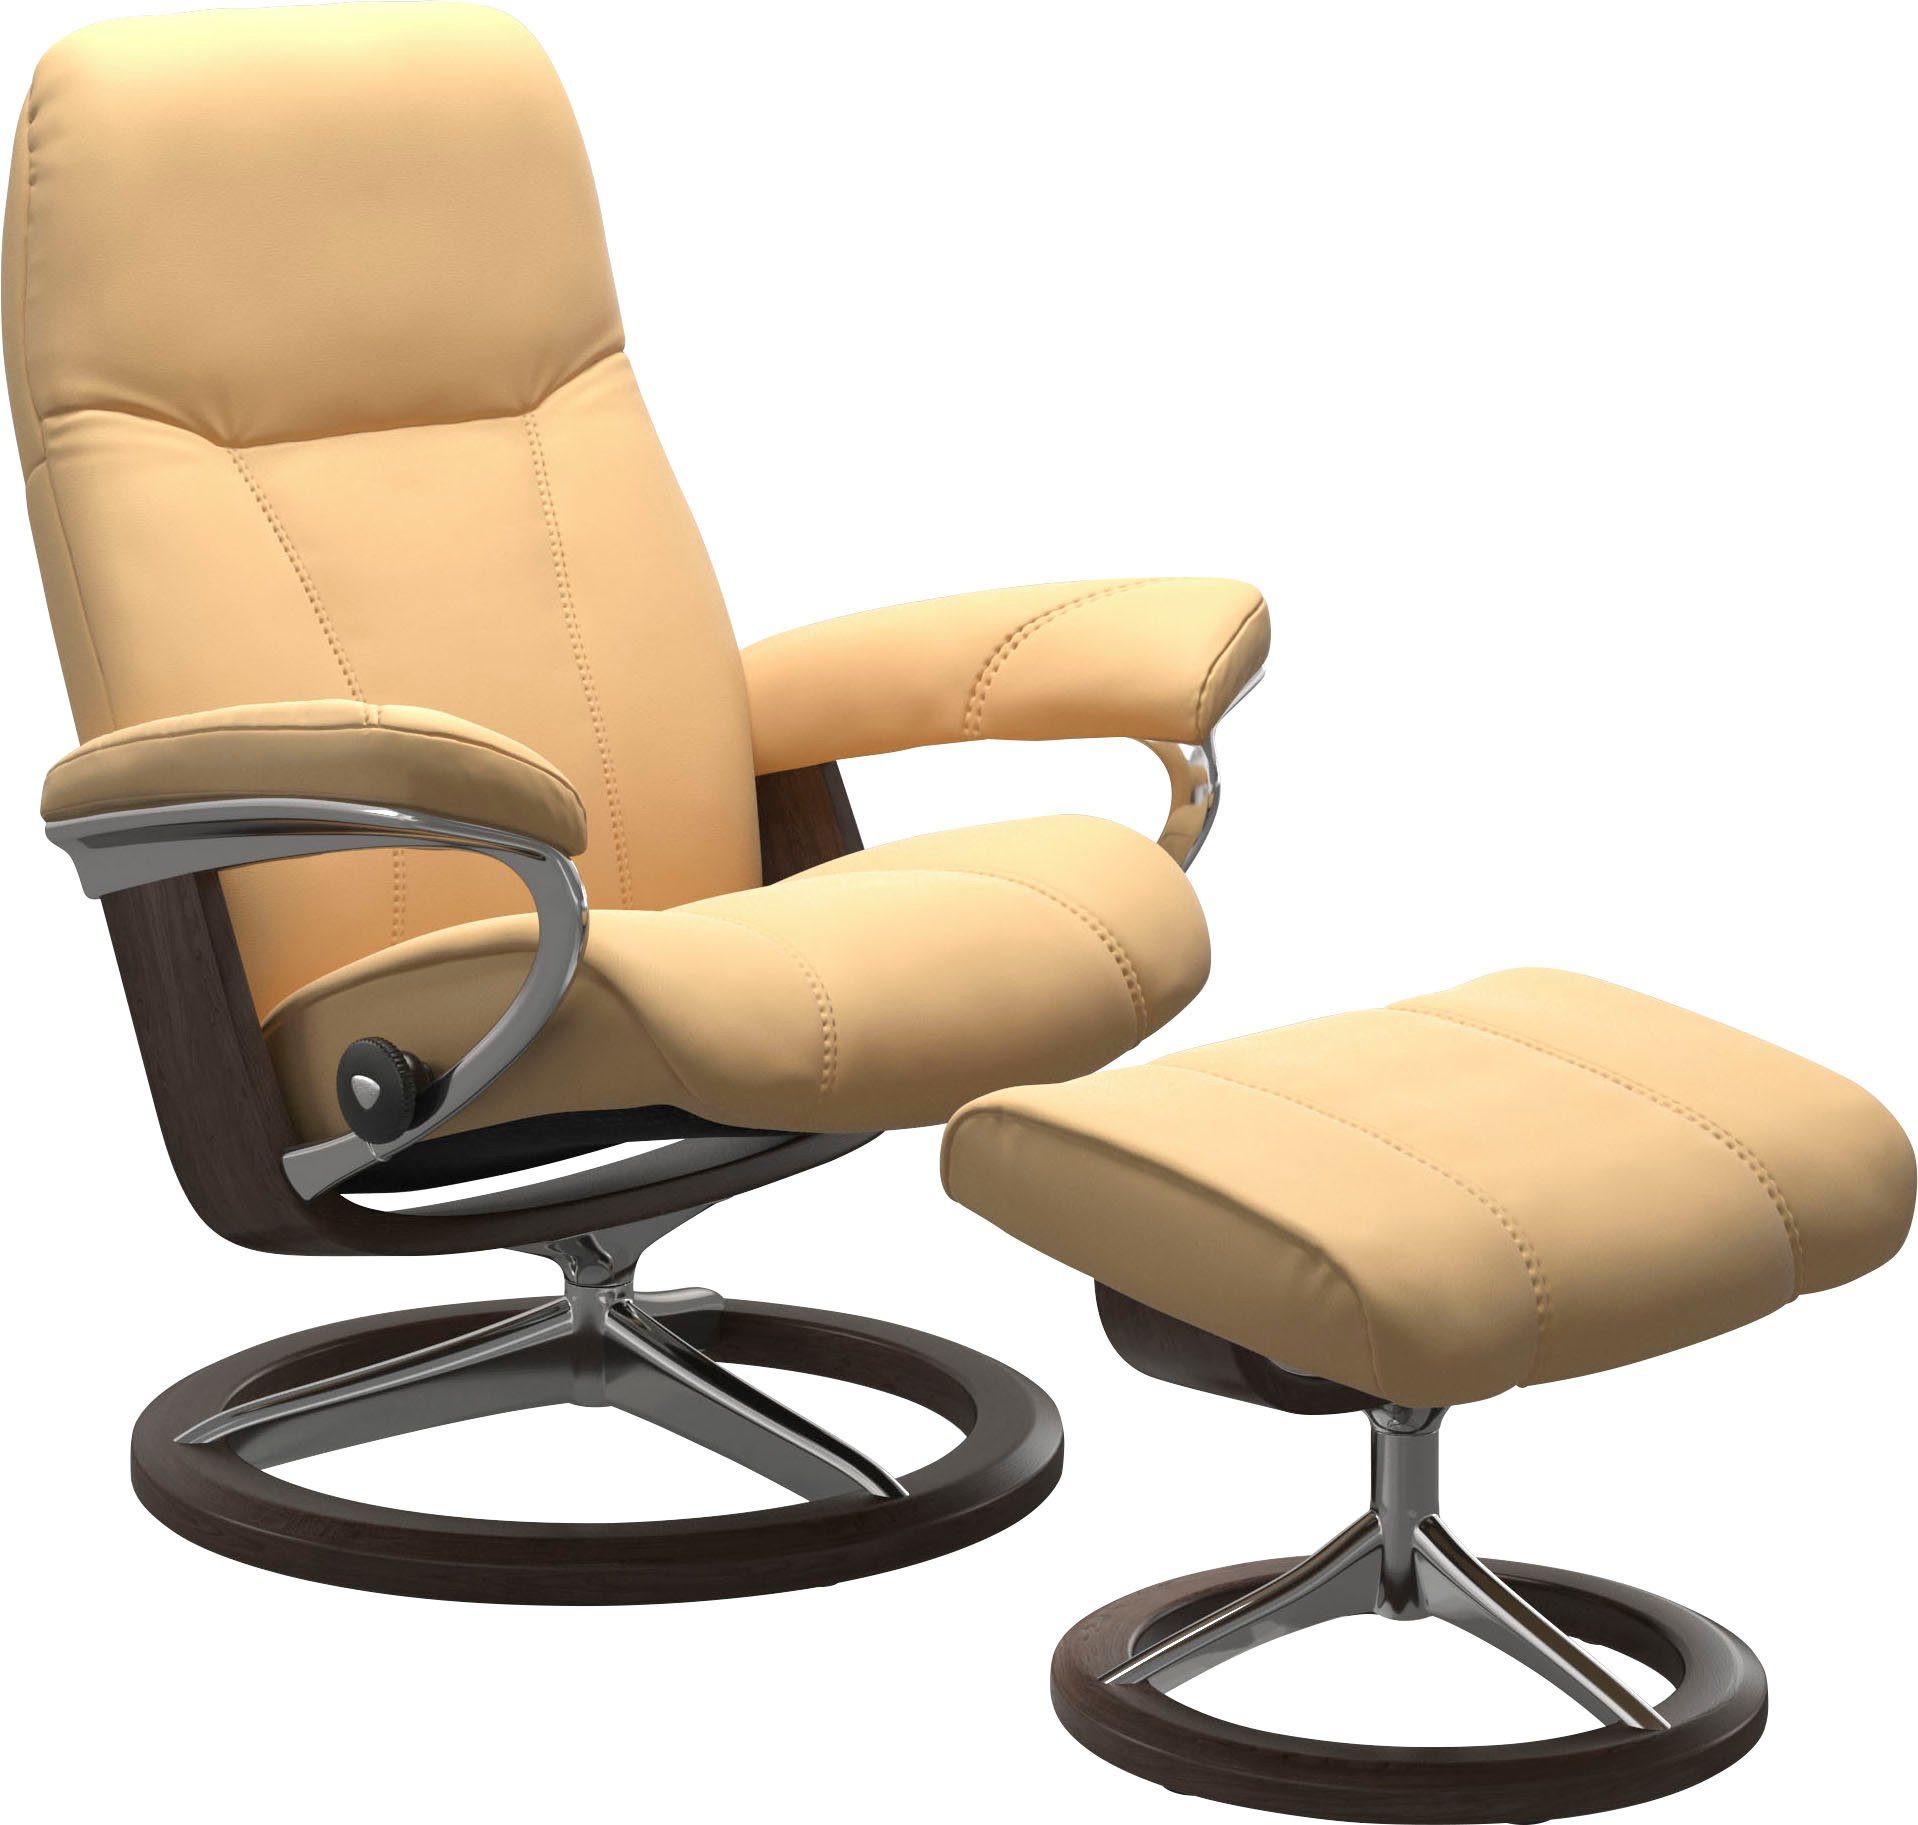 Wenge Consul, Größe L, mit Relaxsessel Stressless® Signature Gestell Base,